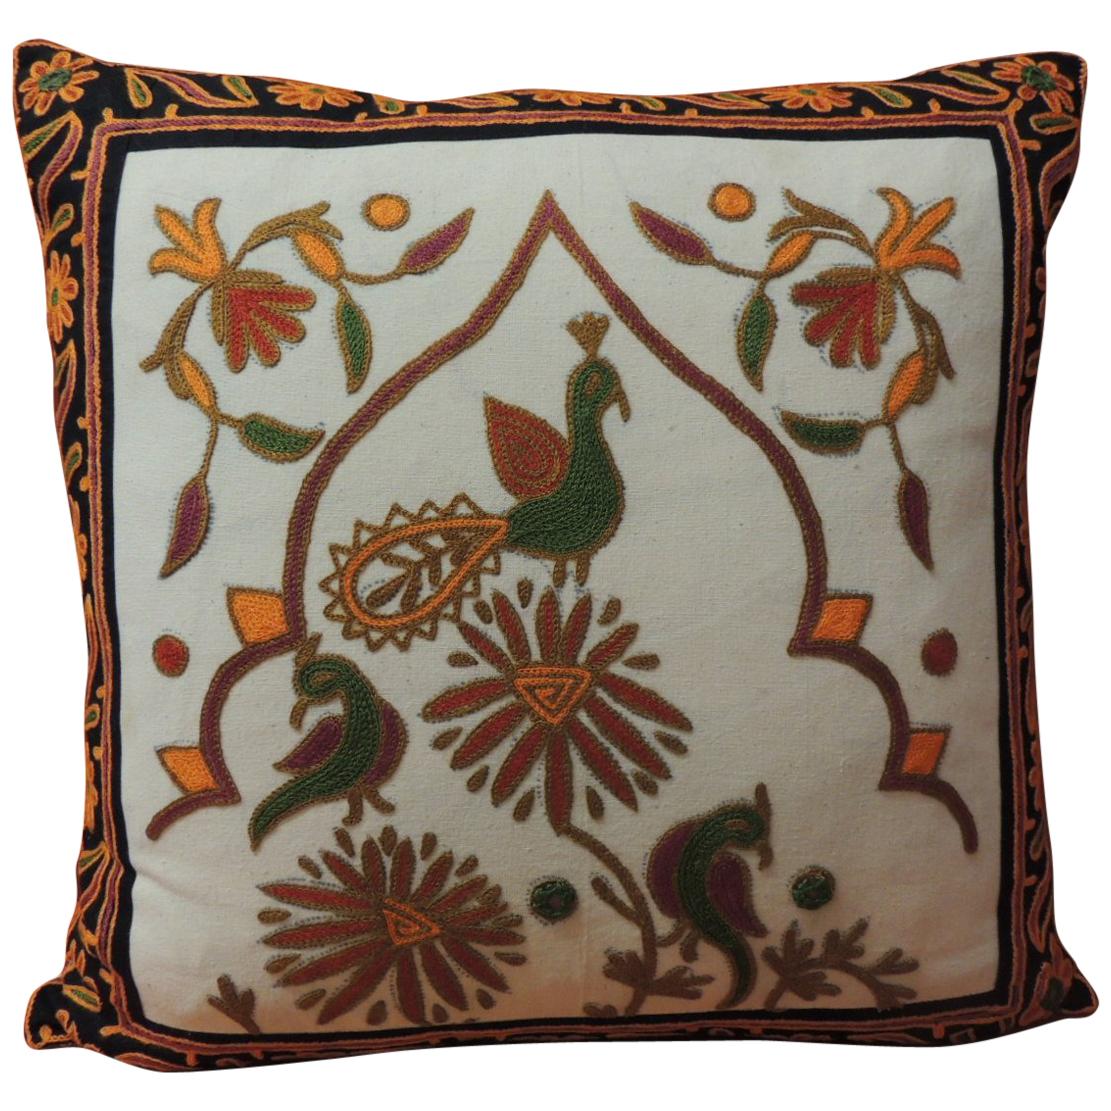 Vintage Embroidered Orange and Green Indian Decorative Pillow